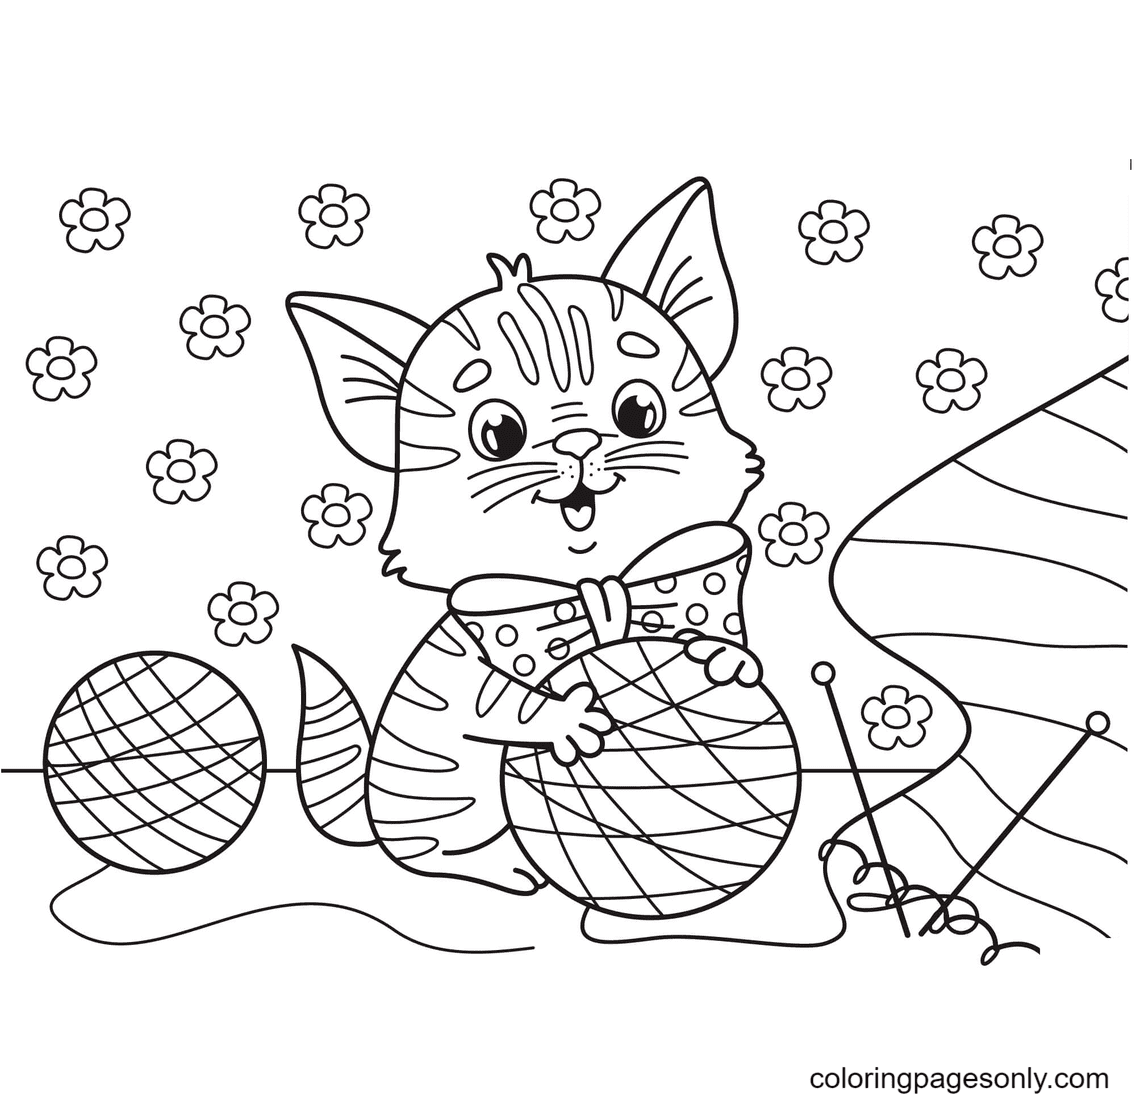 Kitten Hugs a Ball of Yarn Coloring Pages